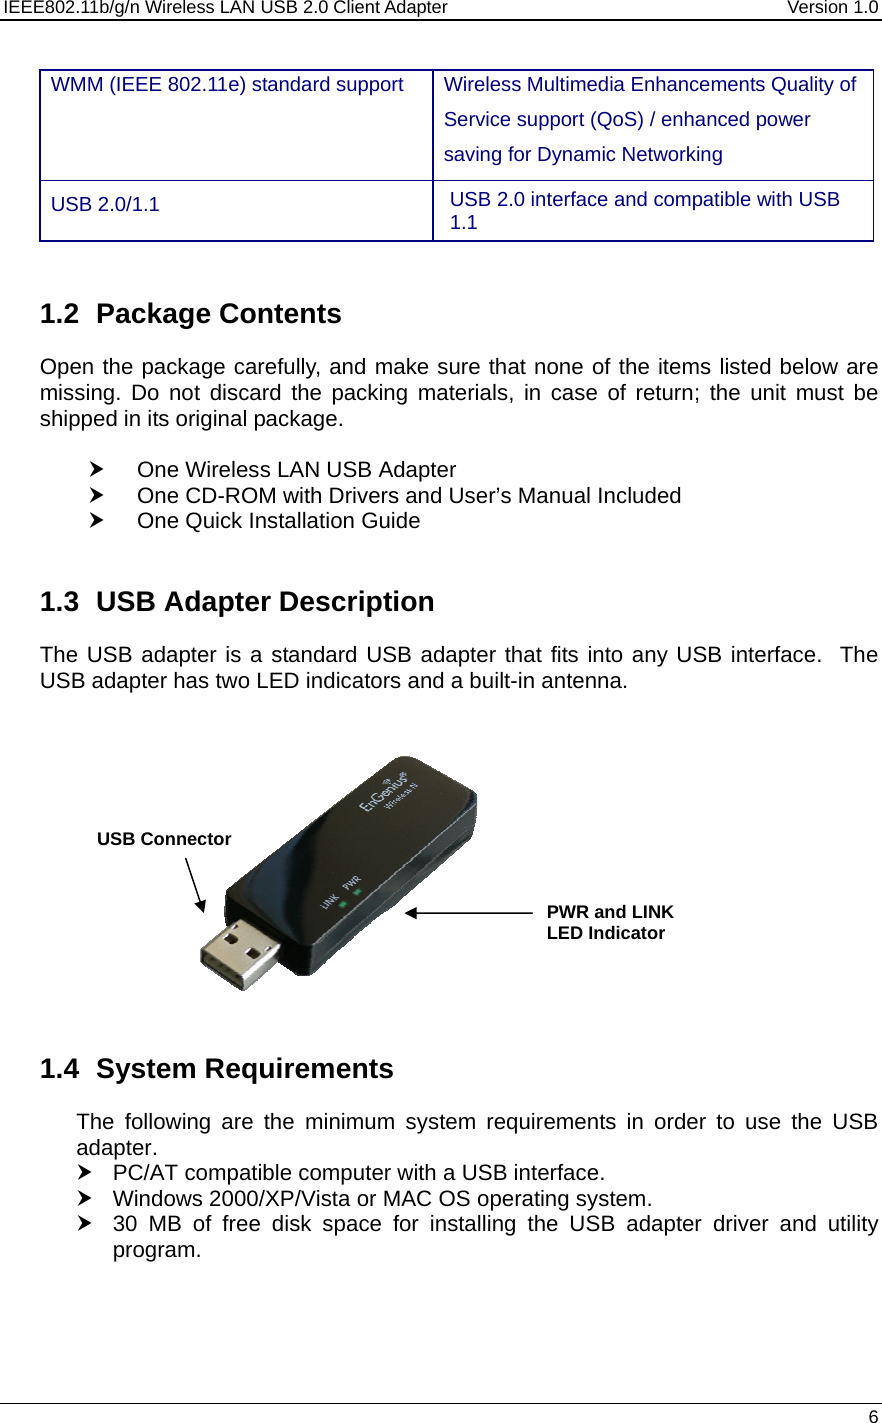 IEEE802.11b/g/n Wireless LAN USB 2.0 Client Adapter  Version 1.0   6  WMM (IEEE 802.11e) standard support   Wireless Multimedia Enhancements Quality of Service support (QoS) / enhanced power saving for Dynamic Networking USB 2.0/1.1  USB 2.0 interface and compatible with USB 1.1   1.2 Package Contents Open the package carefully, and make sure that none of the items listed below are missing. Do not discard the packing materials, in case of return; the unit must be shipped in its original package.  h  One Wireless LAN USB Adapter h  One CD-ROM with Drivers and User’s Manual Included h  One Quick Installation Guide   1.3  USB Adapter Description The USB adapter is a standard USB adapter that fits into any USB interface.  The USB adapter has two LED indicators and a built-in antenna.                1.4 System Requirements The following are the minimum system requirements in order to use the USB adapter. h  PC/AT compatible computer with a USB interface. h  Windows 2000/XP/Vista or MAC OS operating system. h  30 MB of free disk space for installing the USB adapter driver and utility program.    PWR and LINK LED Indicator USB Connector